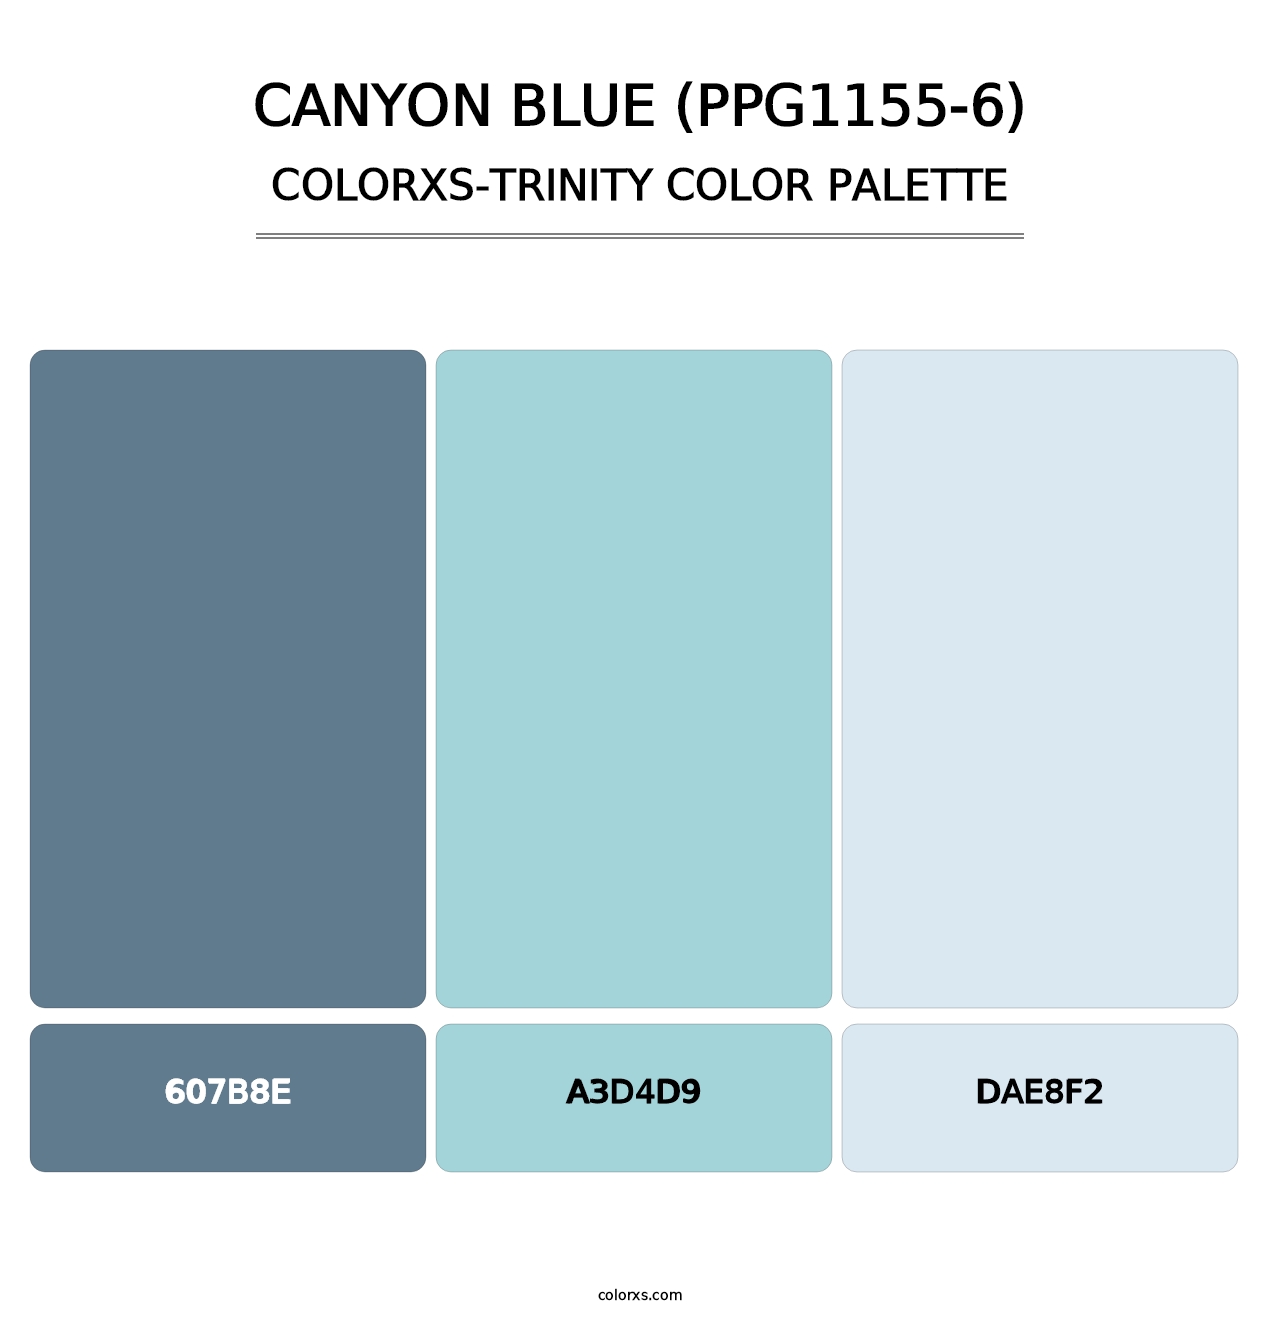 Canyon Blue (PPG1155-6) - Colorxs Trinity Palette